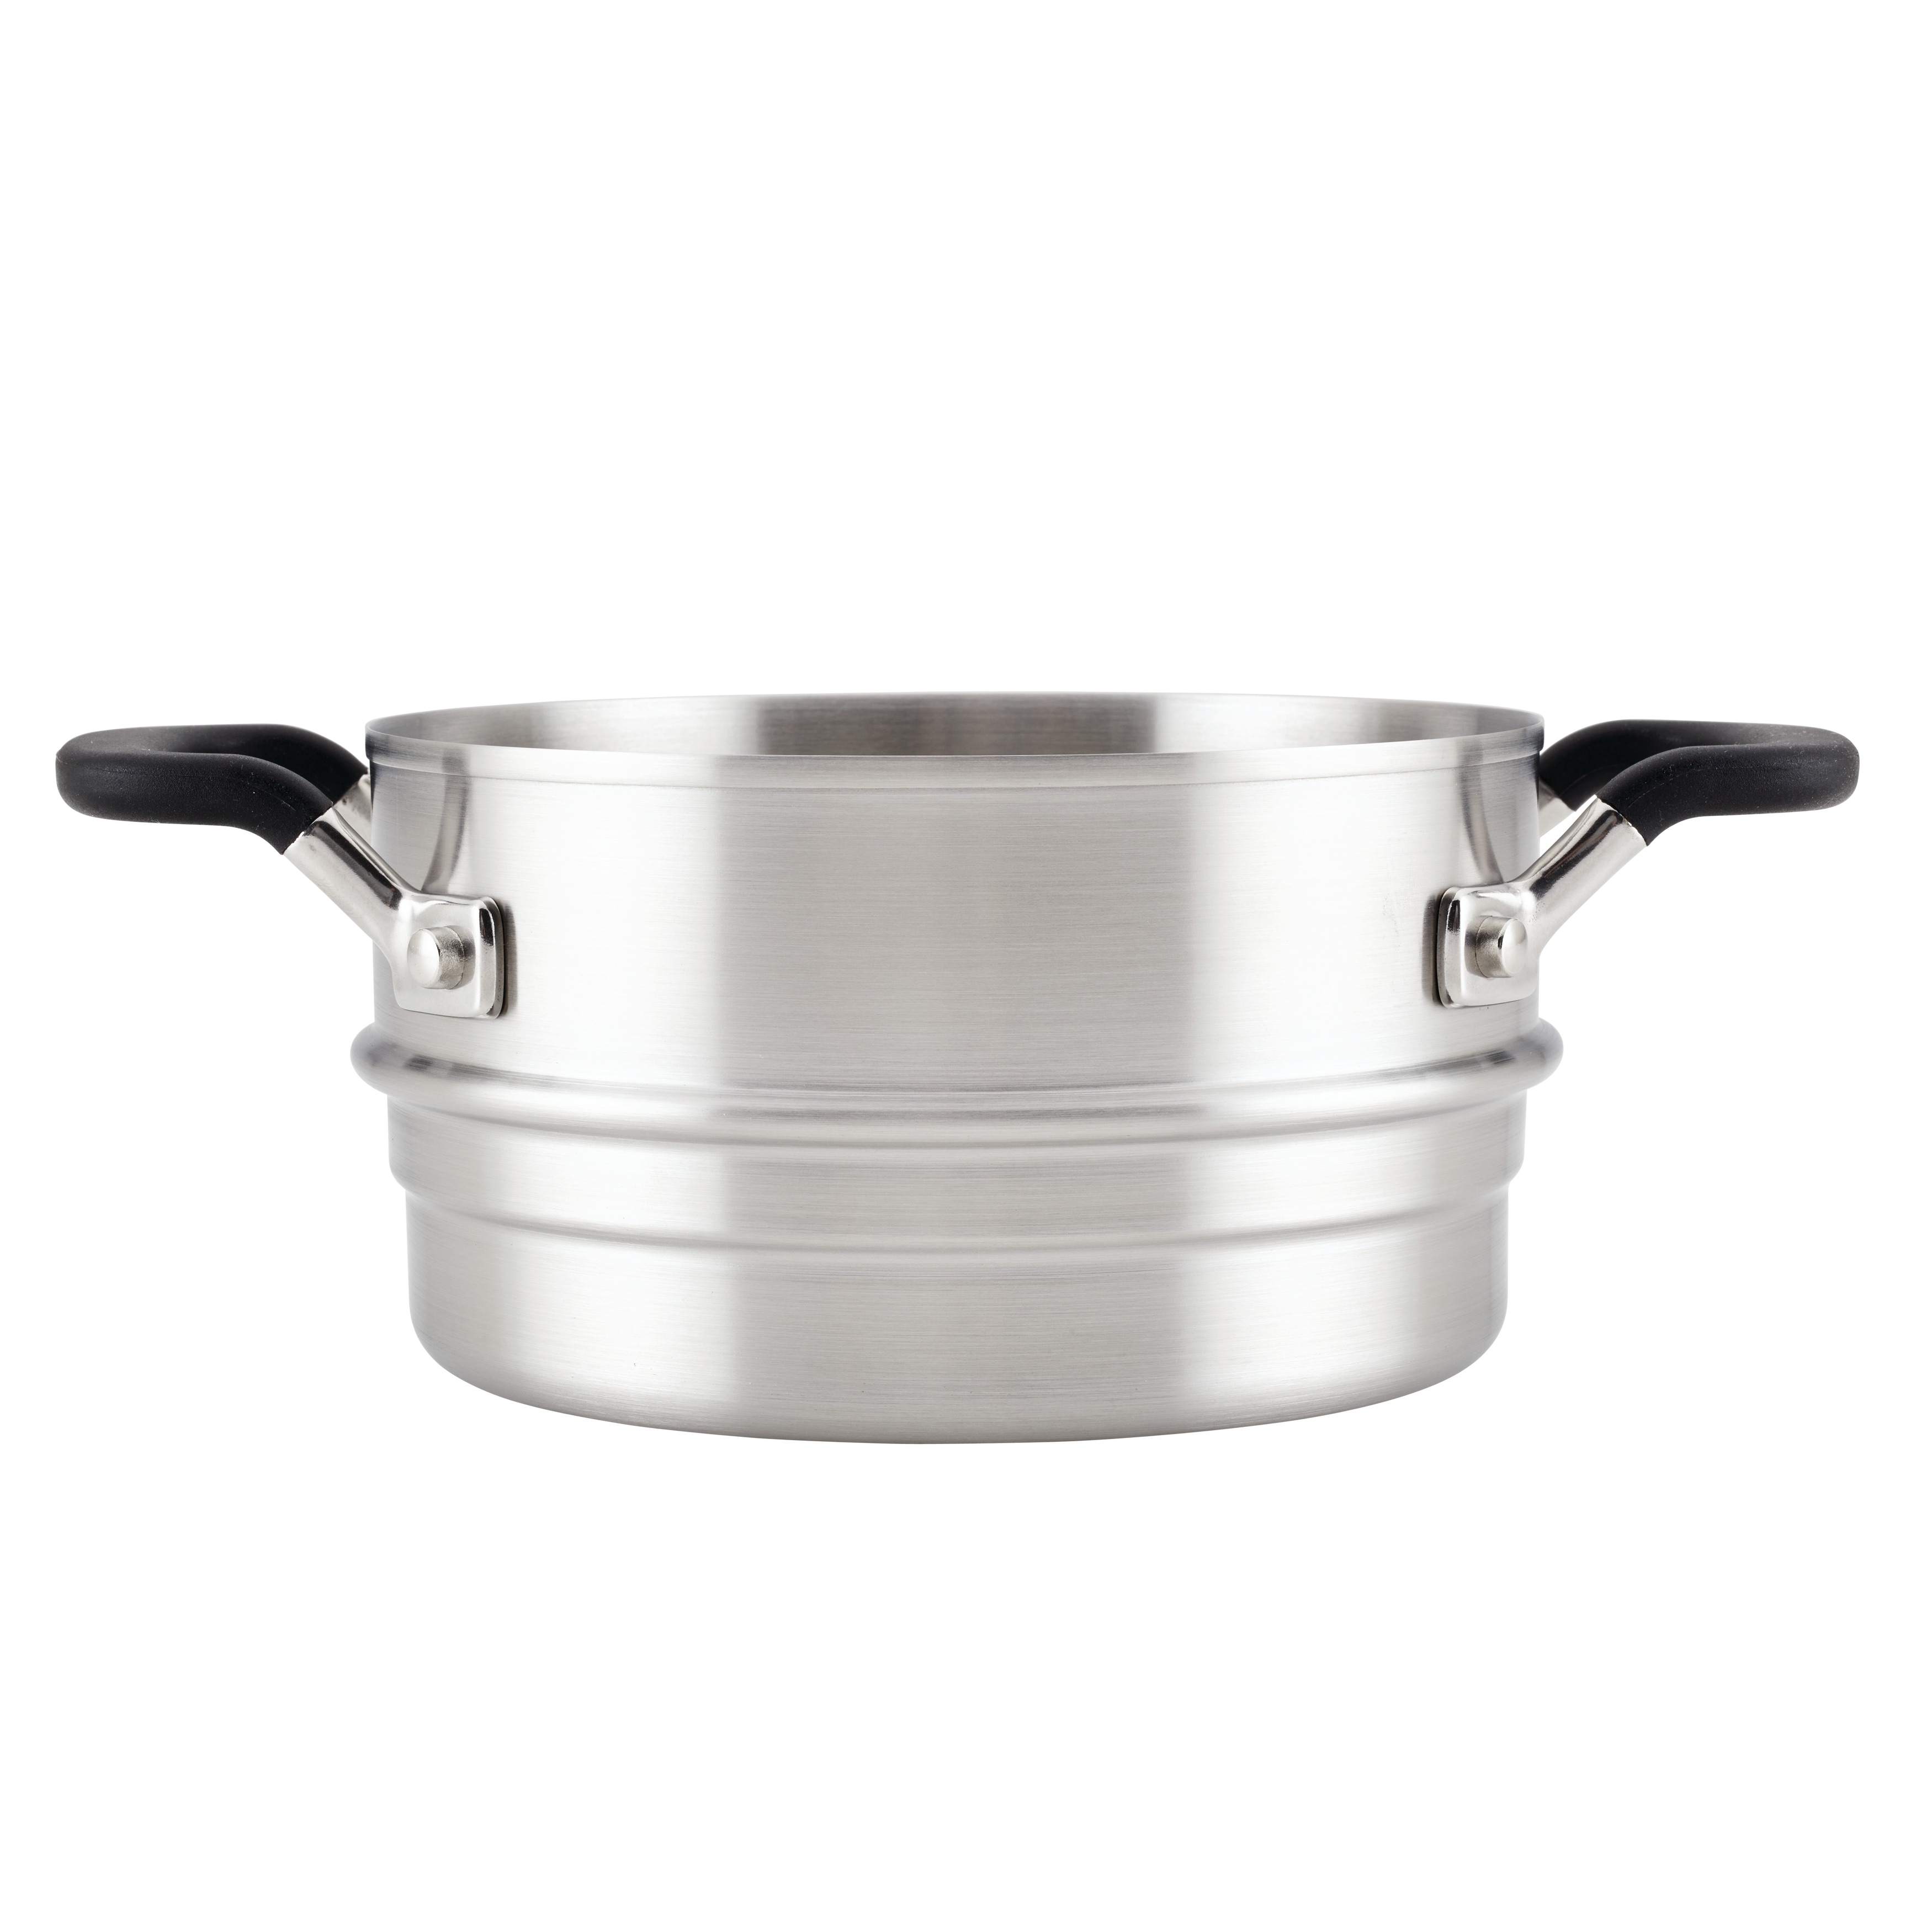 https://ak1.ostkcdn.com/images/products/is/images/direct/398af91cf8fdedbf157980081645847c37a70f6e/KitchenAid-Hard-Anodized-Nonstick-Cookware-Pots-and-Pans-Set%2C-10-Piece%2C-Onyx-Black.jpg